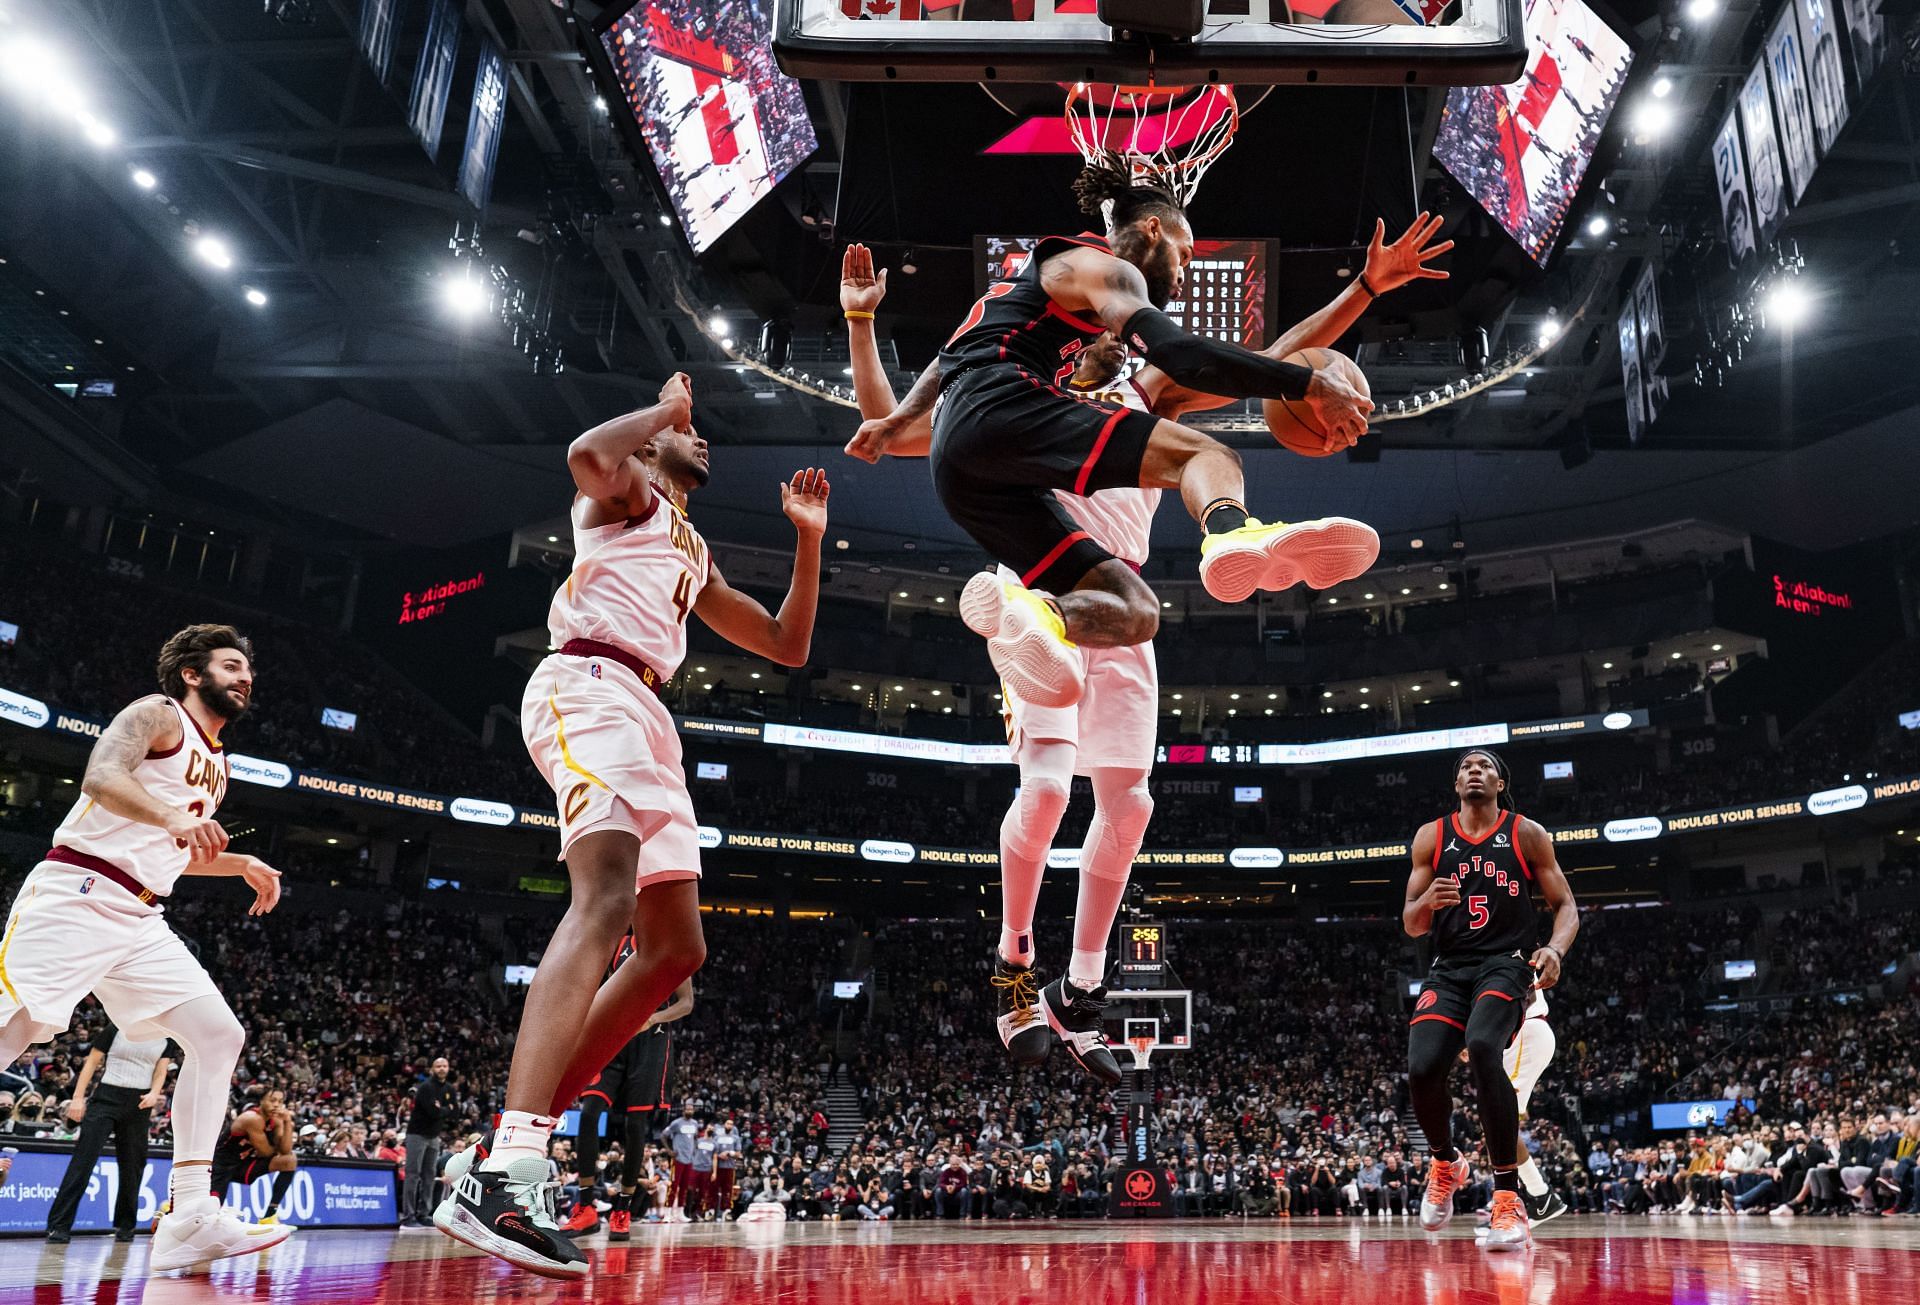 The Toronto Raptors in action against the Cleveland Cavaliers.